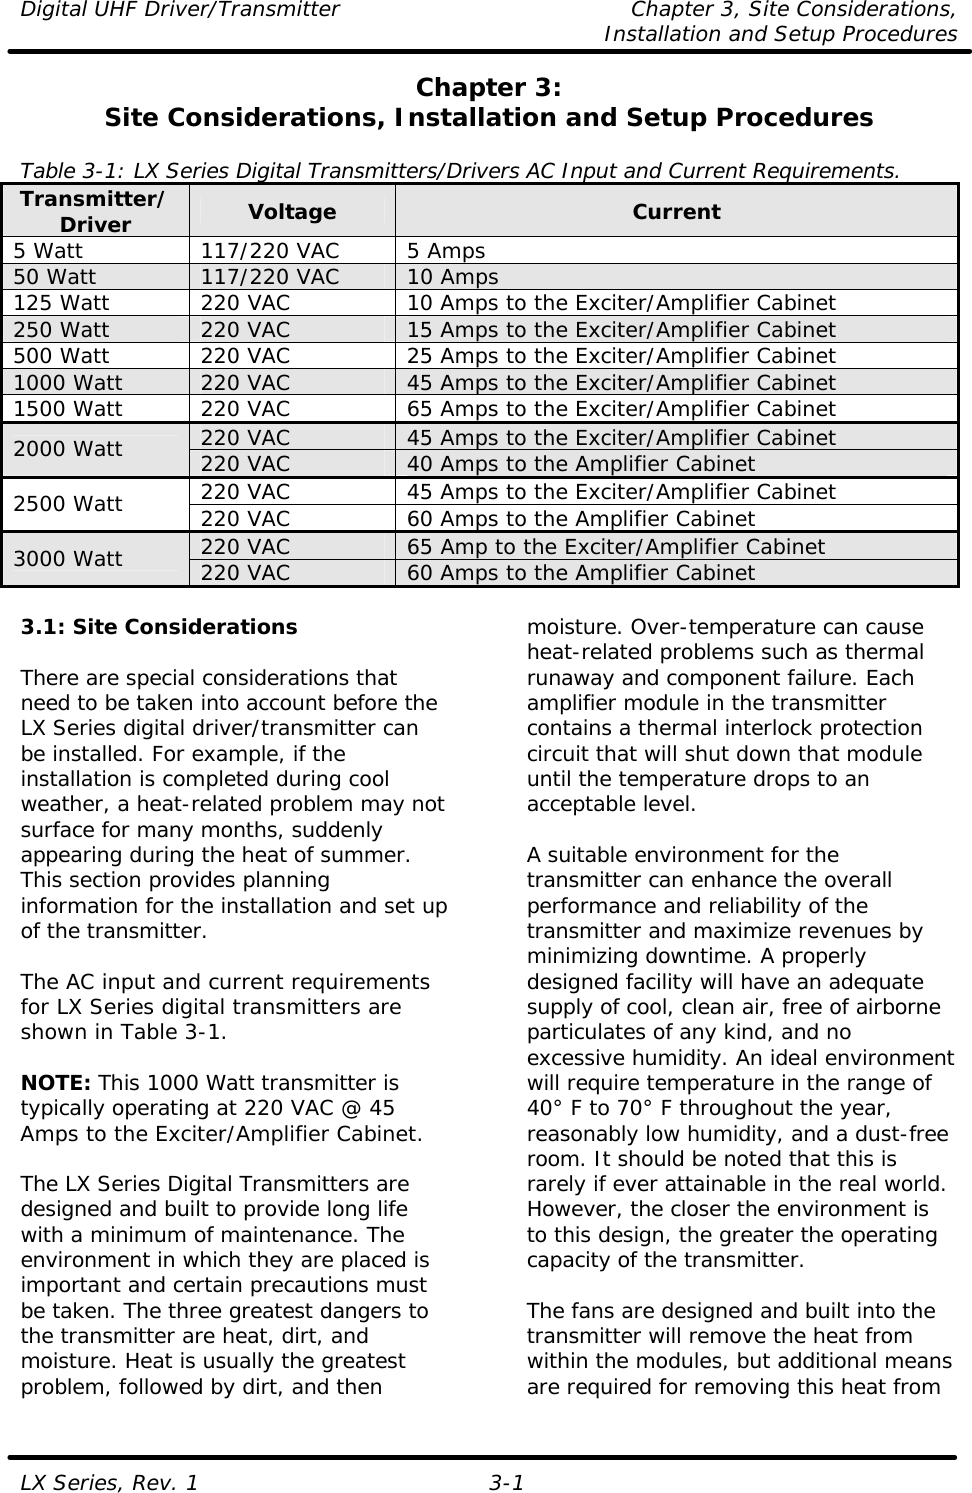 Digital UHF Driver/Transmitter Chapter 3, Site Considerations,   Installation and Setup Procedures  LX Series, Rev. 1 3-1 Chapter 3: Site Considerations, Installation and Setup Procedures  Table 3-1: LX Series Digital Transmitters/Drivers AC Input and Current Requirements. Transmitter/Driver Voltage Current 5 Watt 117/220 VAC 5 Amps 50 Watt 117/220 VAC 10 Amps 125 Watt 220 VAC 10 Amps to the Exciter/Amplifier Cabinet 250 Watt 220 VAC 15 Amps to the Exciter/Amplifier Cabinet 500 Watt 220 VAC 25 Amps to the Exciter/Amplifier Cabinet 1000 Watt 220 VAC 45 Amps to the Exciter/Amplifier Cabinet 1500 Watt 220 VAC 65 Amps to the Exciter/Amplifier Cabinet 220 VAC 45 Amps to the Exciter/Amplifier Cabinet 2000 Watt 220 VAC 40 Amps to the Amplifier Cabinet 220 VAC 45 Amps to the Exciter/Amplifier Cabinet 2500 Watt 220 VAC 60 Amps to the Amplifier Cabinet 220 VAC 65 Amp to the Exciter/Amplifier Cabinet 3000 Watt 220 VAC 60 Amps to the Amplifier Cabinet  3.1: Site Considerations  There are special considerations that need to be taken into account before the LX Series digital driver/transmitter can be installed. For example, if the installation is completed during cool weather, a heat-related problem may not surface for many months, suddenly appearing during the heat of summer. This section provides planning information for the installation and set up of the transmitter.  The AC input and current requirements for LX Series digital transmitters are shown in Table 3-1.  NOTE: This 1000 Watt transmitter is typically operating at 220 VAC @ 45 Amps to the Exciter/Amplifier Cabinet.  The LX Series Digital Transmitters are designed and built to provide long life with a minimum of maintenance. The environment in which they are placed is important and certain precautions must be taken. The three greatest dangers to the transmitter are heat, dirt, and moisture. Heat is usually the greatest problem, followed by dirt, and then moisture. Over-temperature can cause heat-related problems such as thermal runaway and component failure. Each amplifier module in the transmitter contains a thermal interlock protection circuit that will shut down that module until the temperature drops to an acceptable level.  A suitable environment for the transmitter can enhance the overall performance and reliability of the transmitter and maximize revenues by minimizing downtime. A properly designed facility will have an adequate supply of cool, clean air, free of airborne particulates of any kind, and no excessive humidity. An ideal environment will require temperature in the range of 40° F to 70° F throughout the year, reasonably low humidity, and a dust-free room. It should be noted that this is rarely if ever attainable in the real world. However, the closer the environment is to this design, the greater the operating capacity of the transmitter.  The fans are designed and built into the transmitter will remove the heat from within the modules, but additional means are required for removing this heat from 